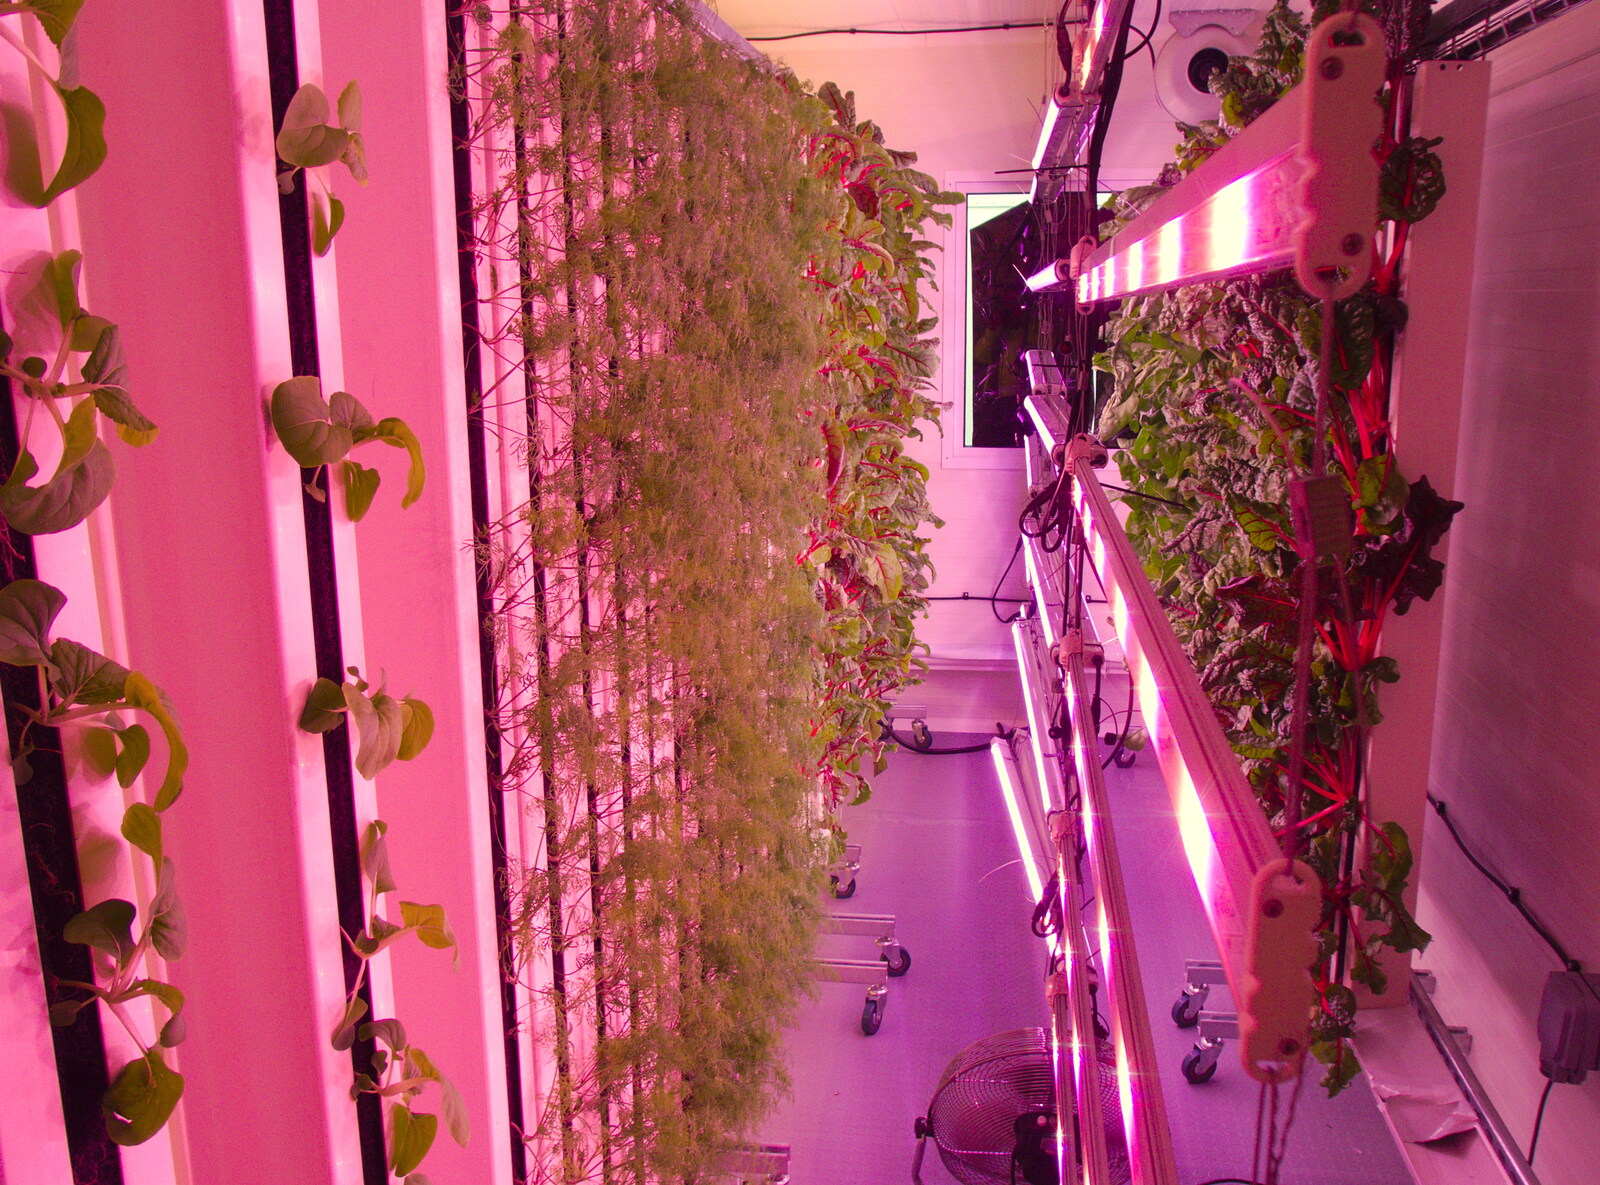 Pink LED lights from Up on the Roof: a Hydroponic City Farm, Kingdom Street, Paddington - 3rd September 2019